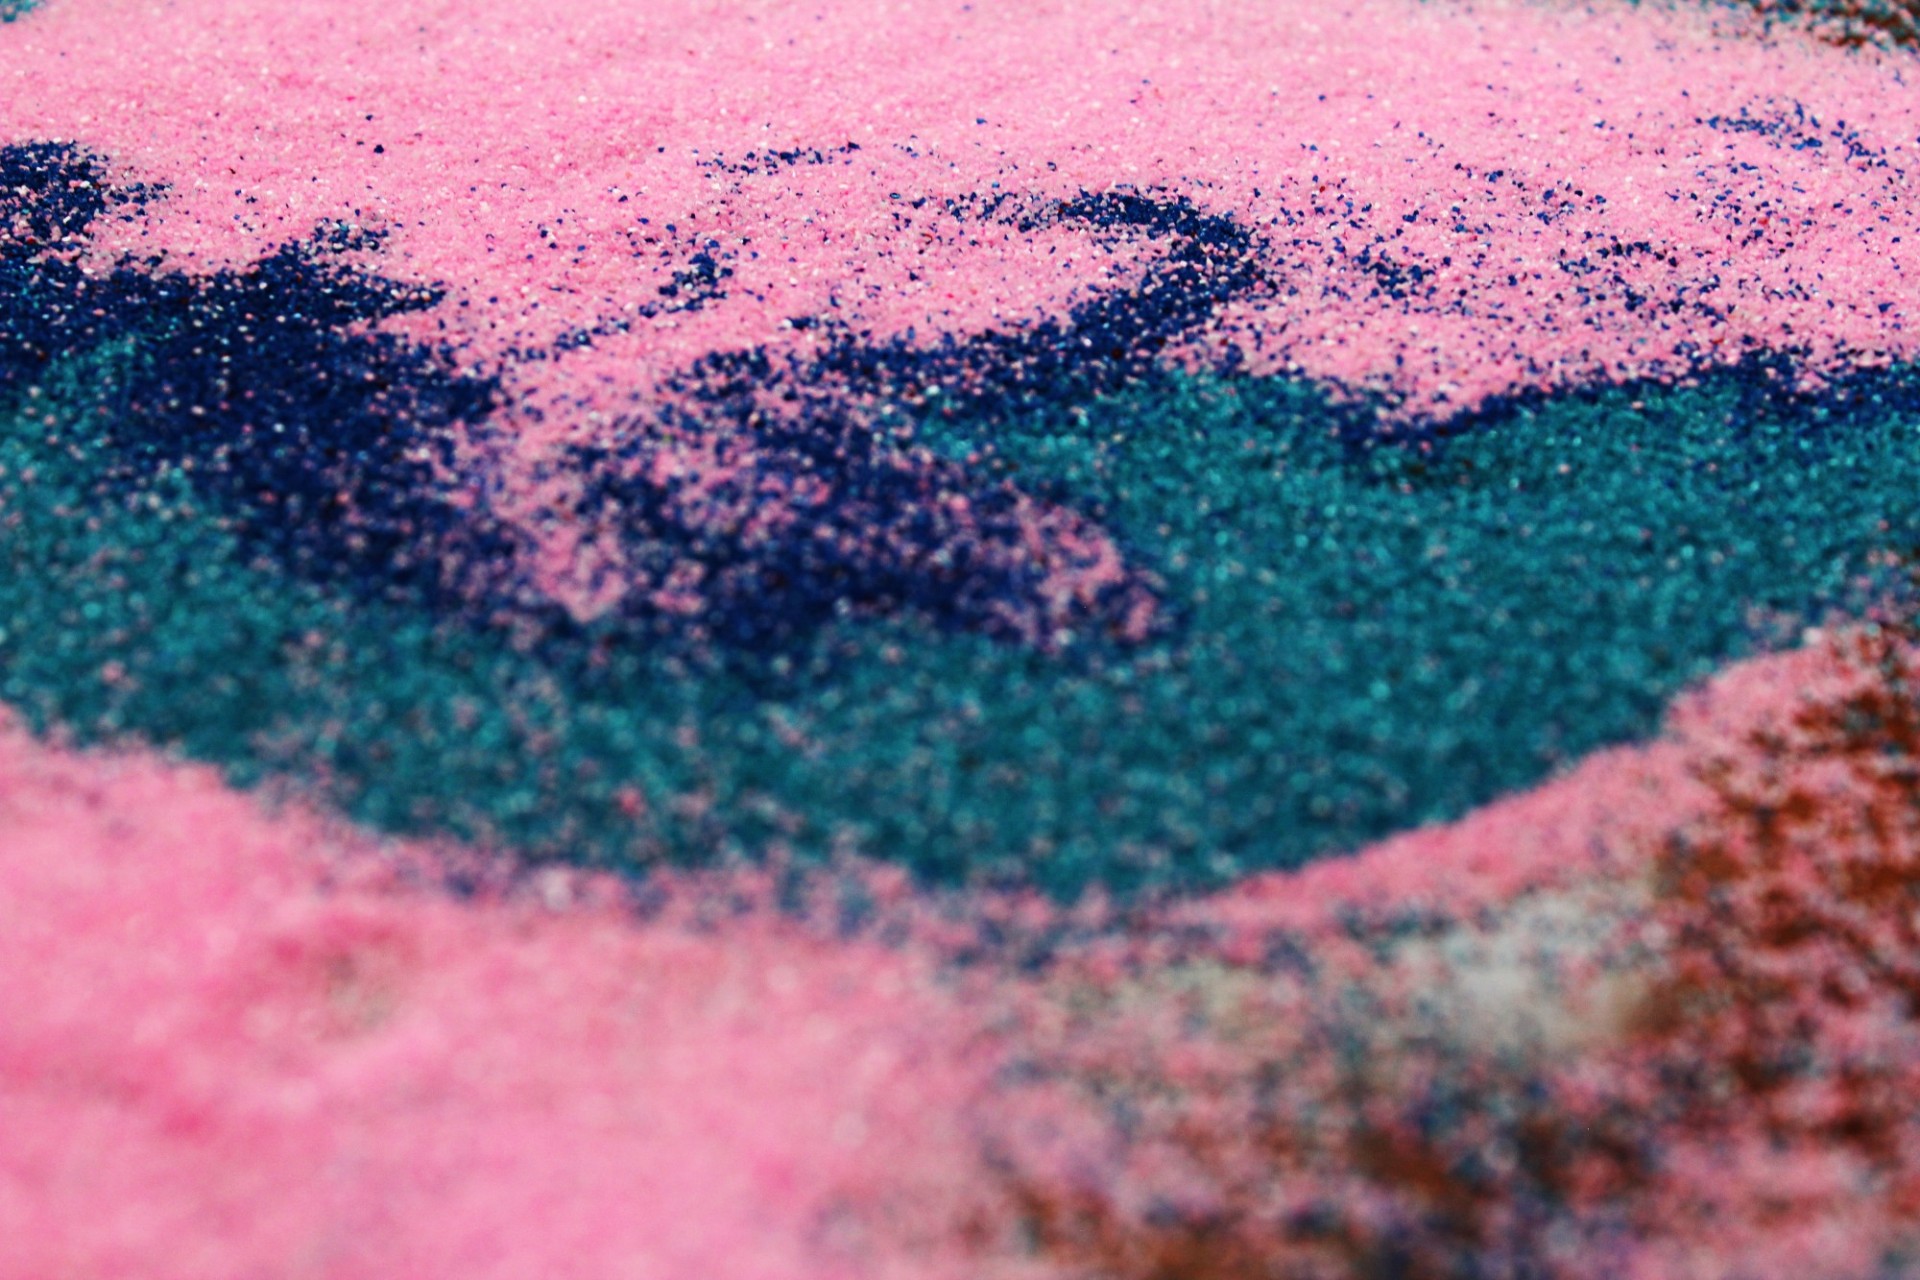 Close-up of small grains of swirling colors including bright pink, dark blue, and teal green